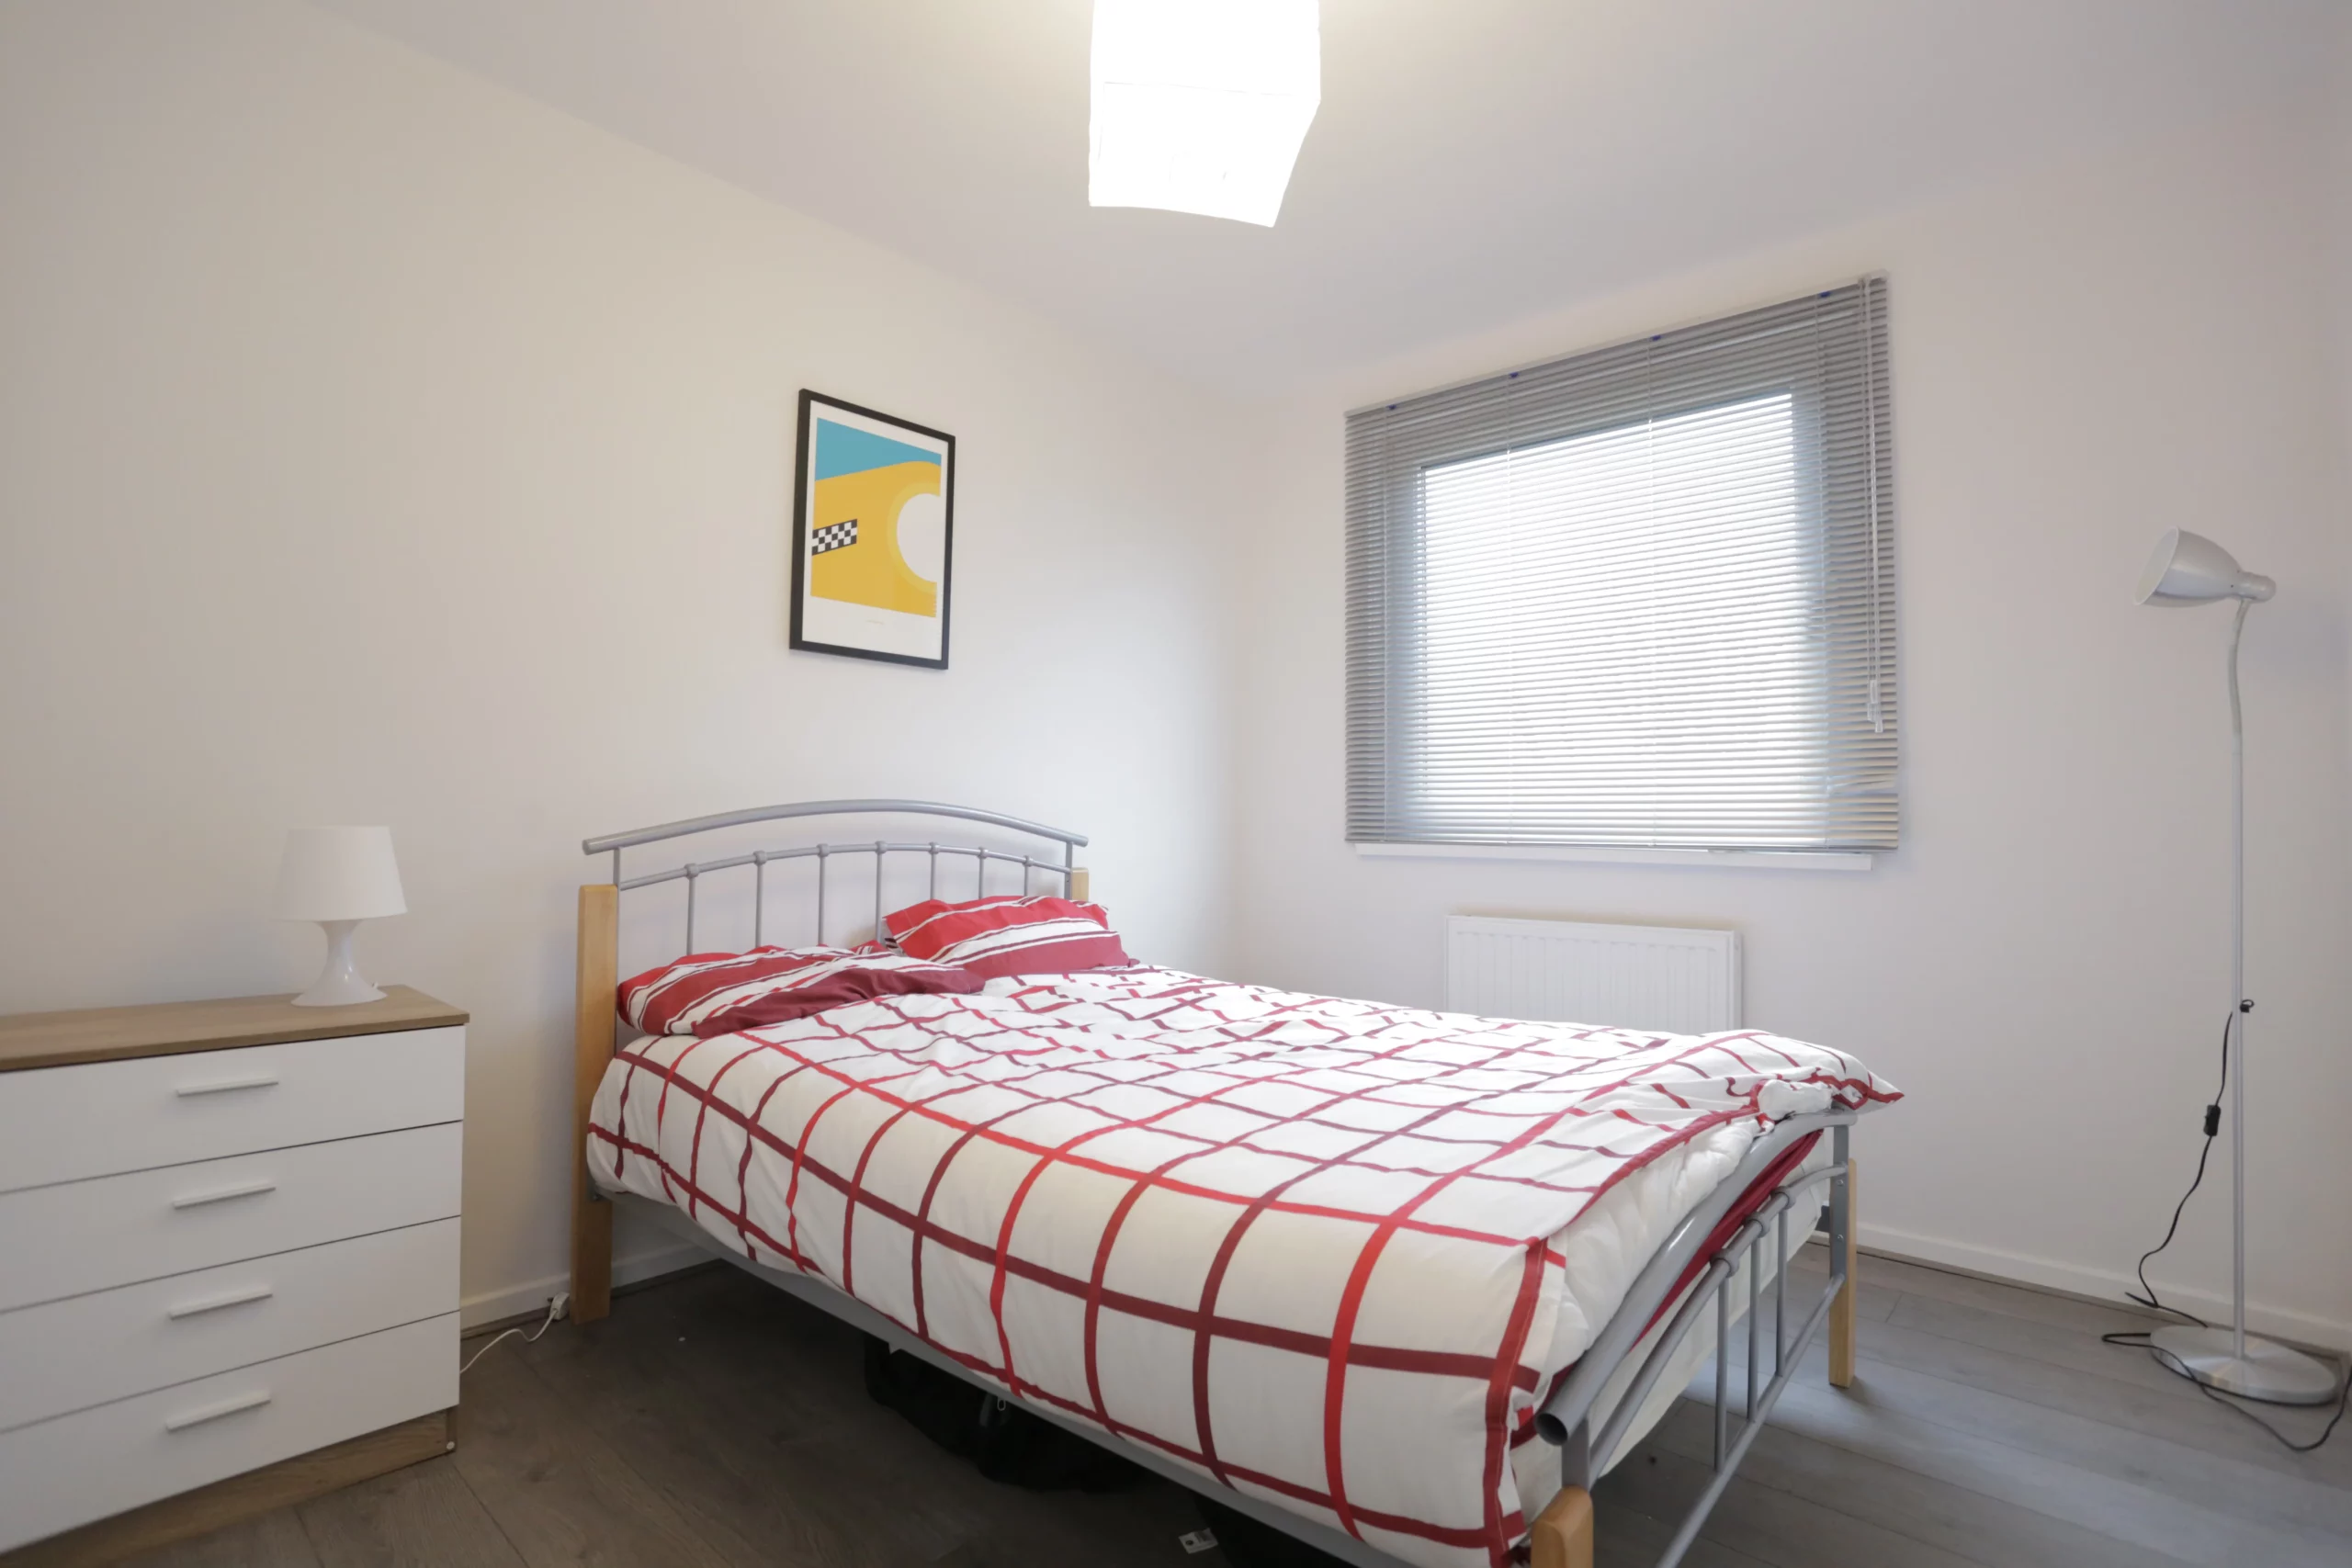 Four Bedroom Flat located in Limehouse